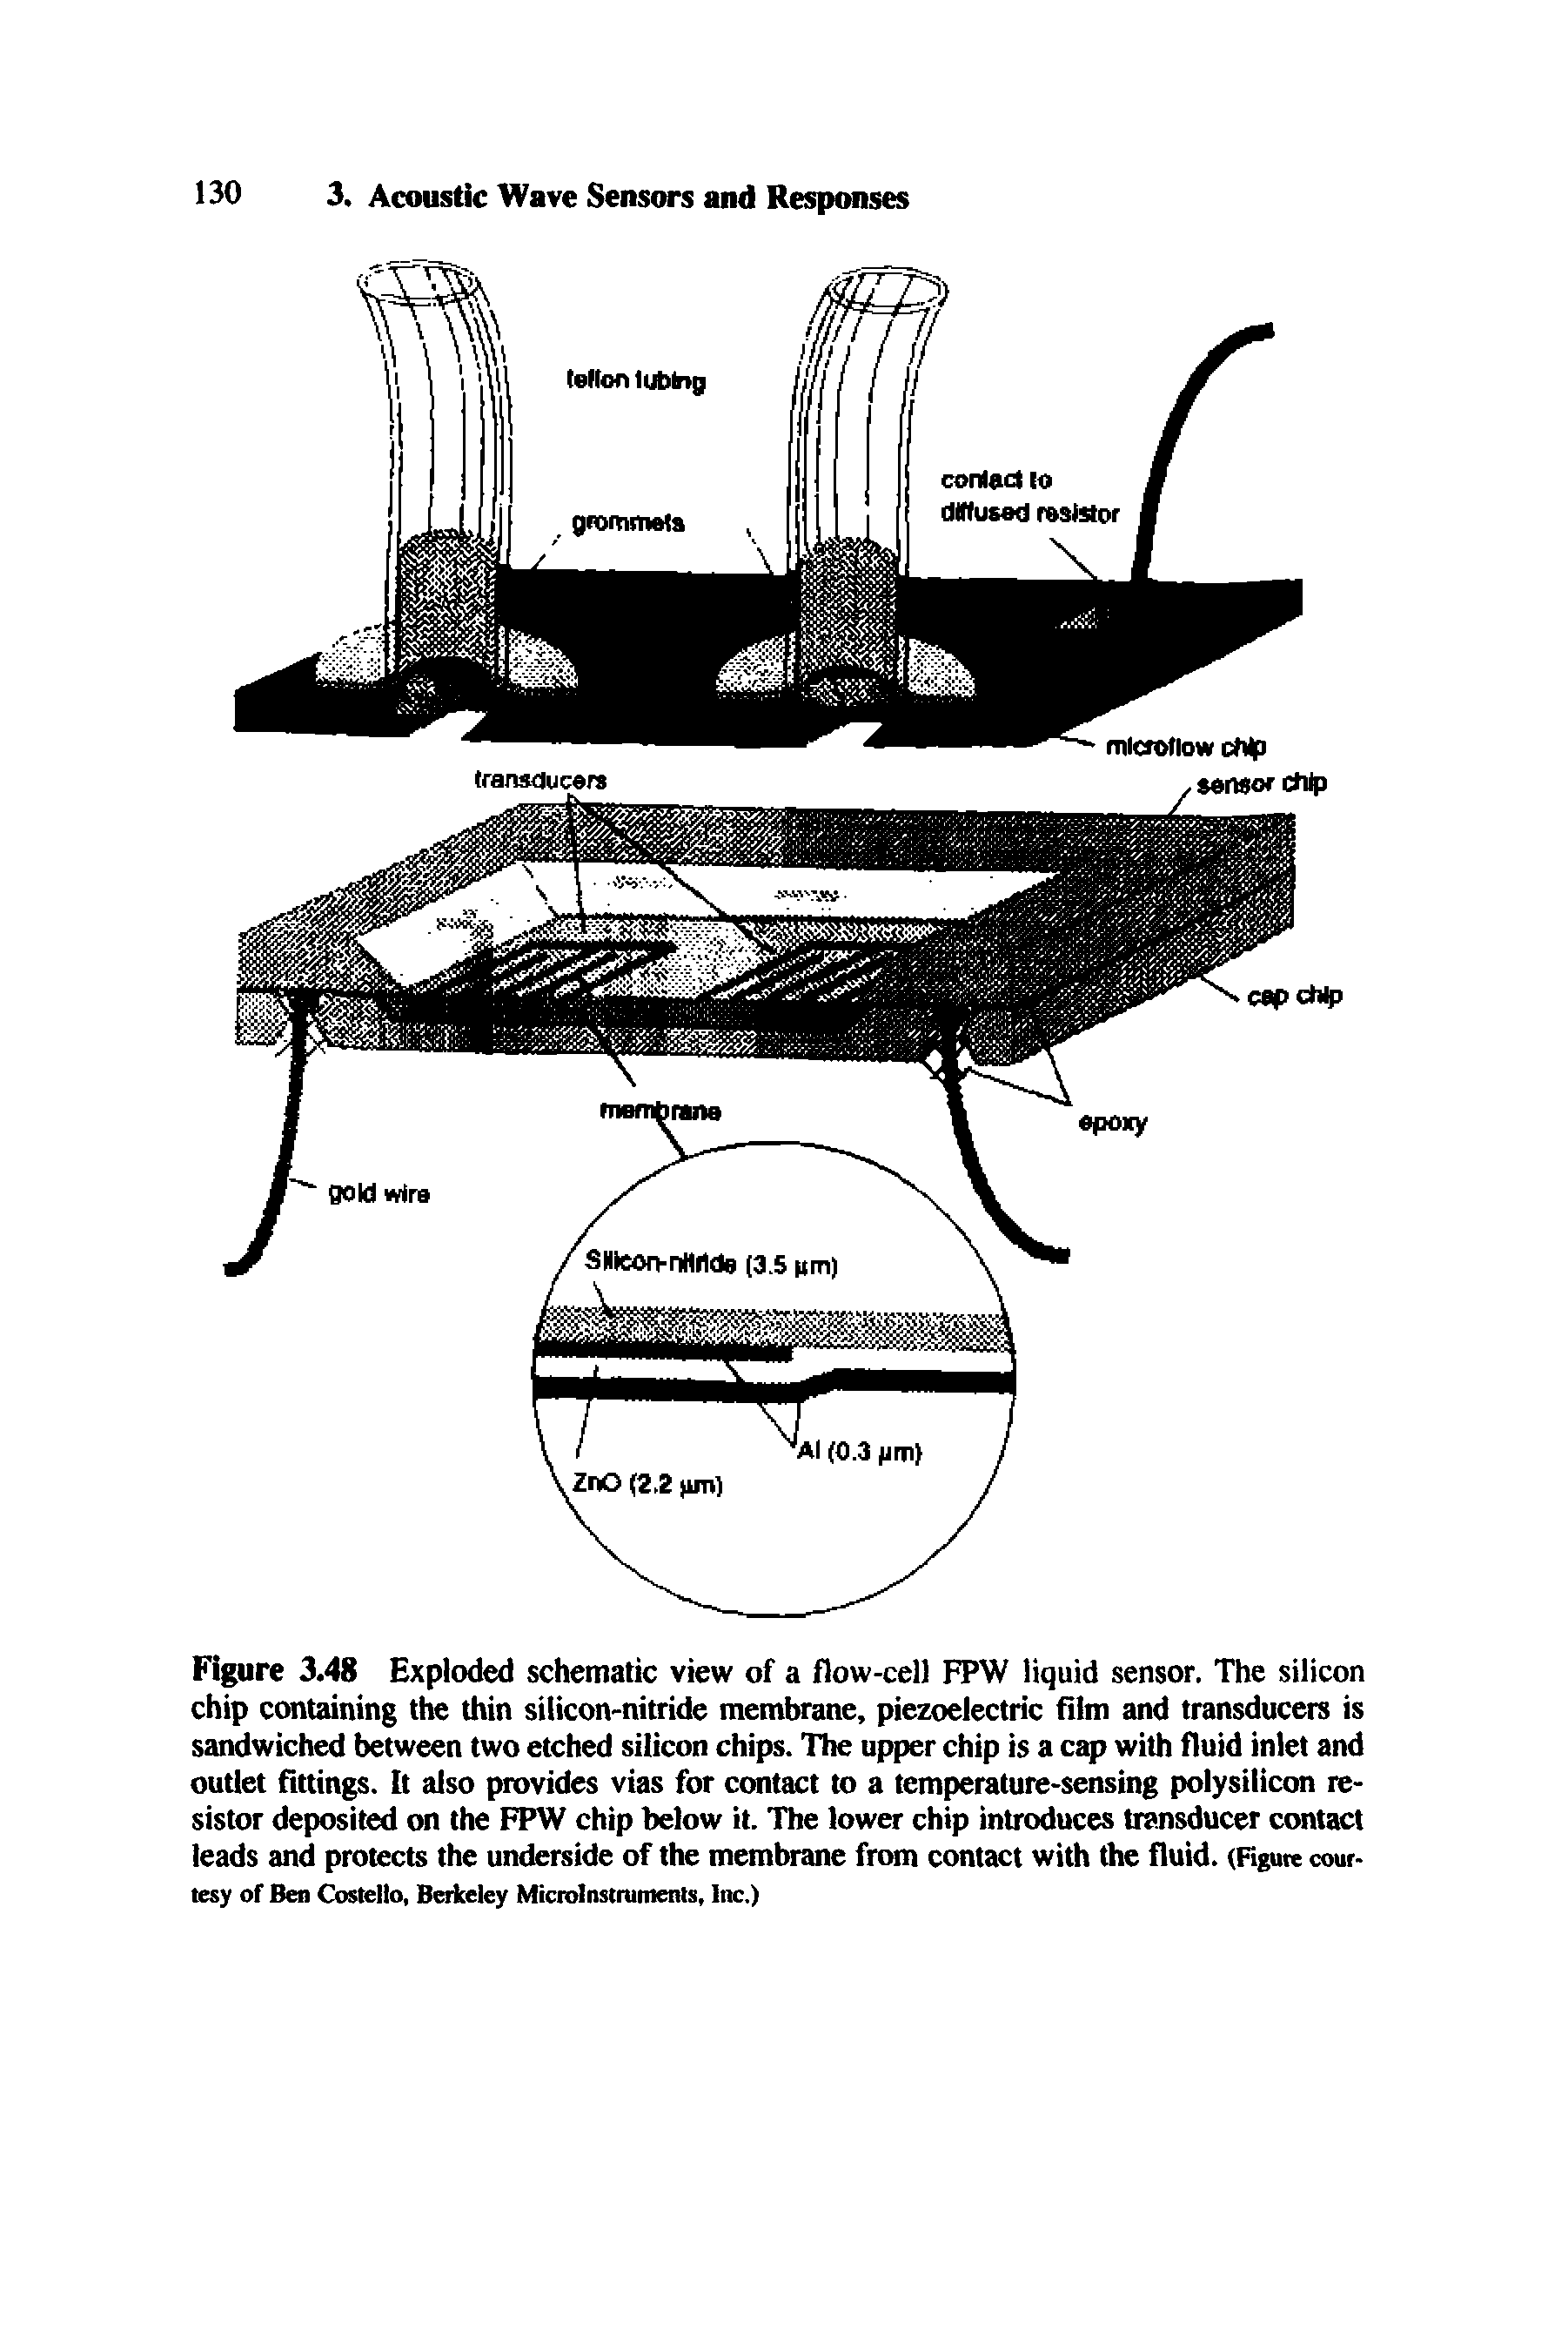 Figure 3.48 Exploded schematic view of a flow-cell FPW liquid sensor. The silicon chip containing die thin silicon-nitride membrane, piezoelectric film and transducers is sandwiched between two etched silicon chips. The upper chip is a cap with fluid inlet and outlet fittings, b also provides vias for contact to a temperature-sensing polysilicon resistor deposited on the FPW chip below it. The lower chip introduces transducer contact leads and protects the underside of the membrane fitm contact with the fluid. (Hgwc courtesy of Beo Costello, Bokeley Microliulratitents, Inc.)...